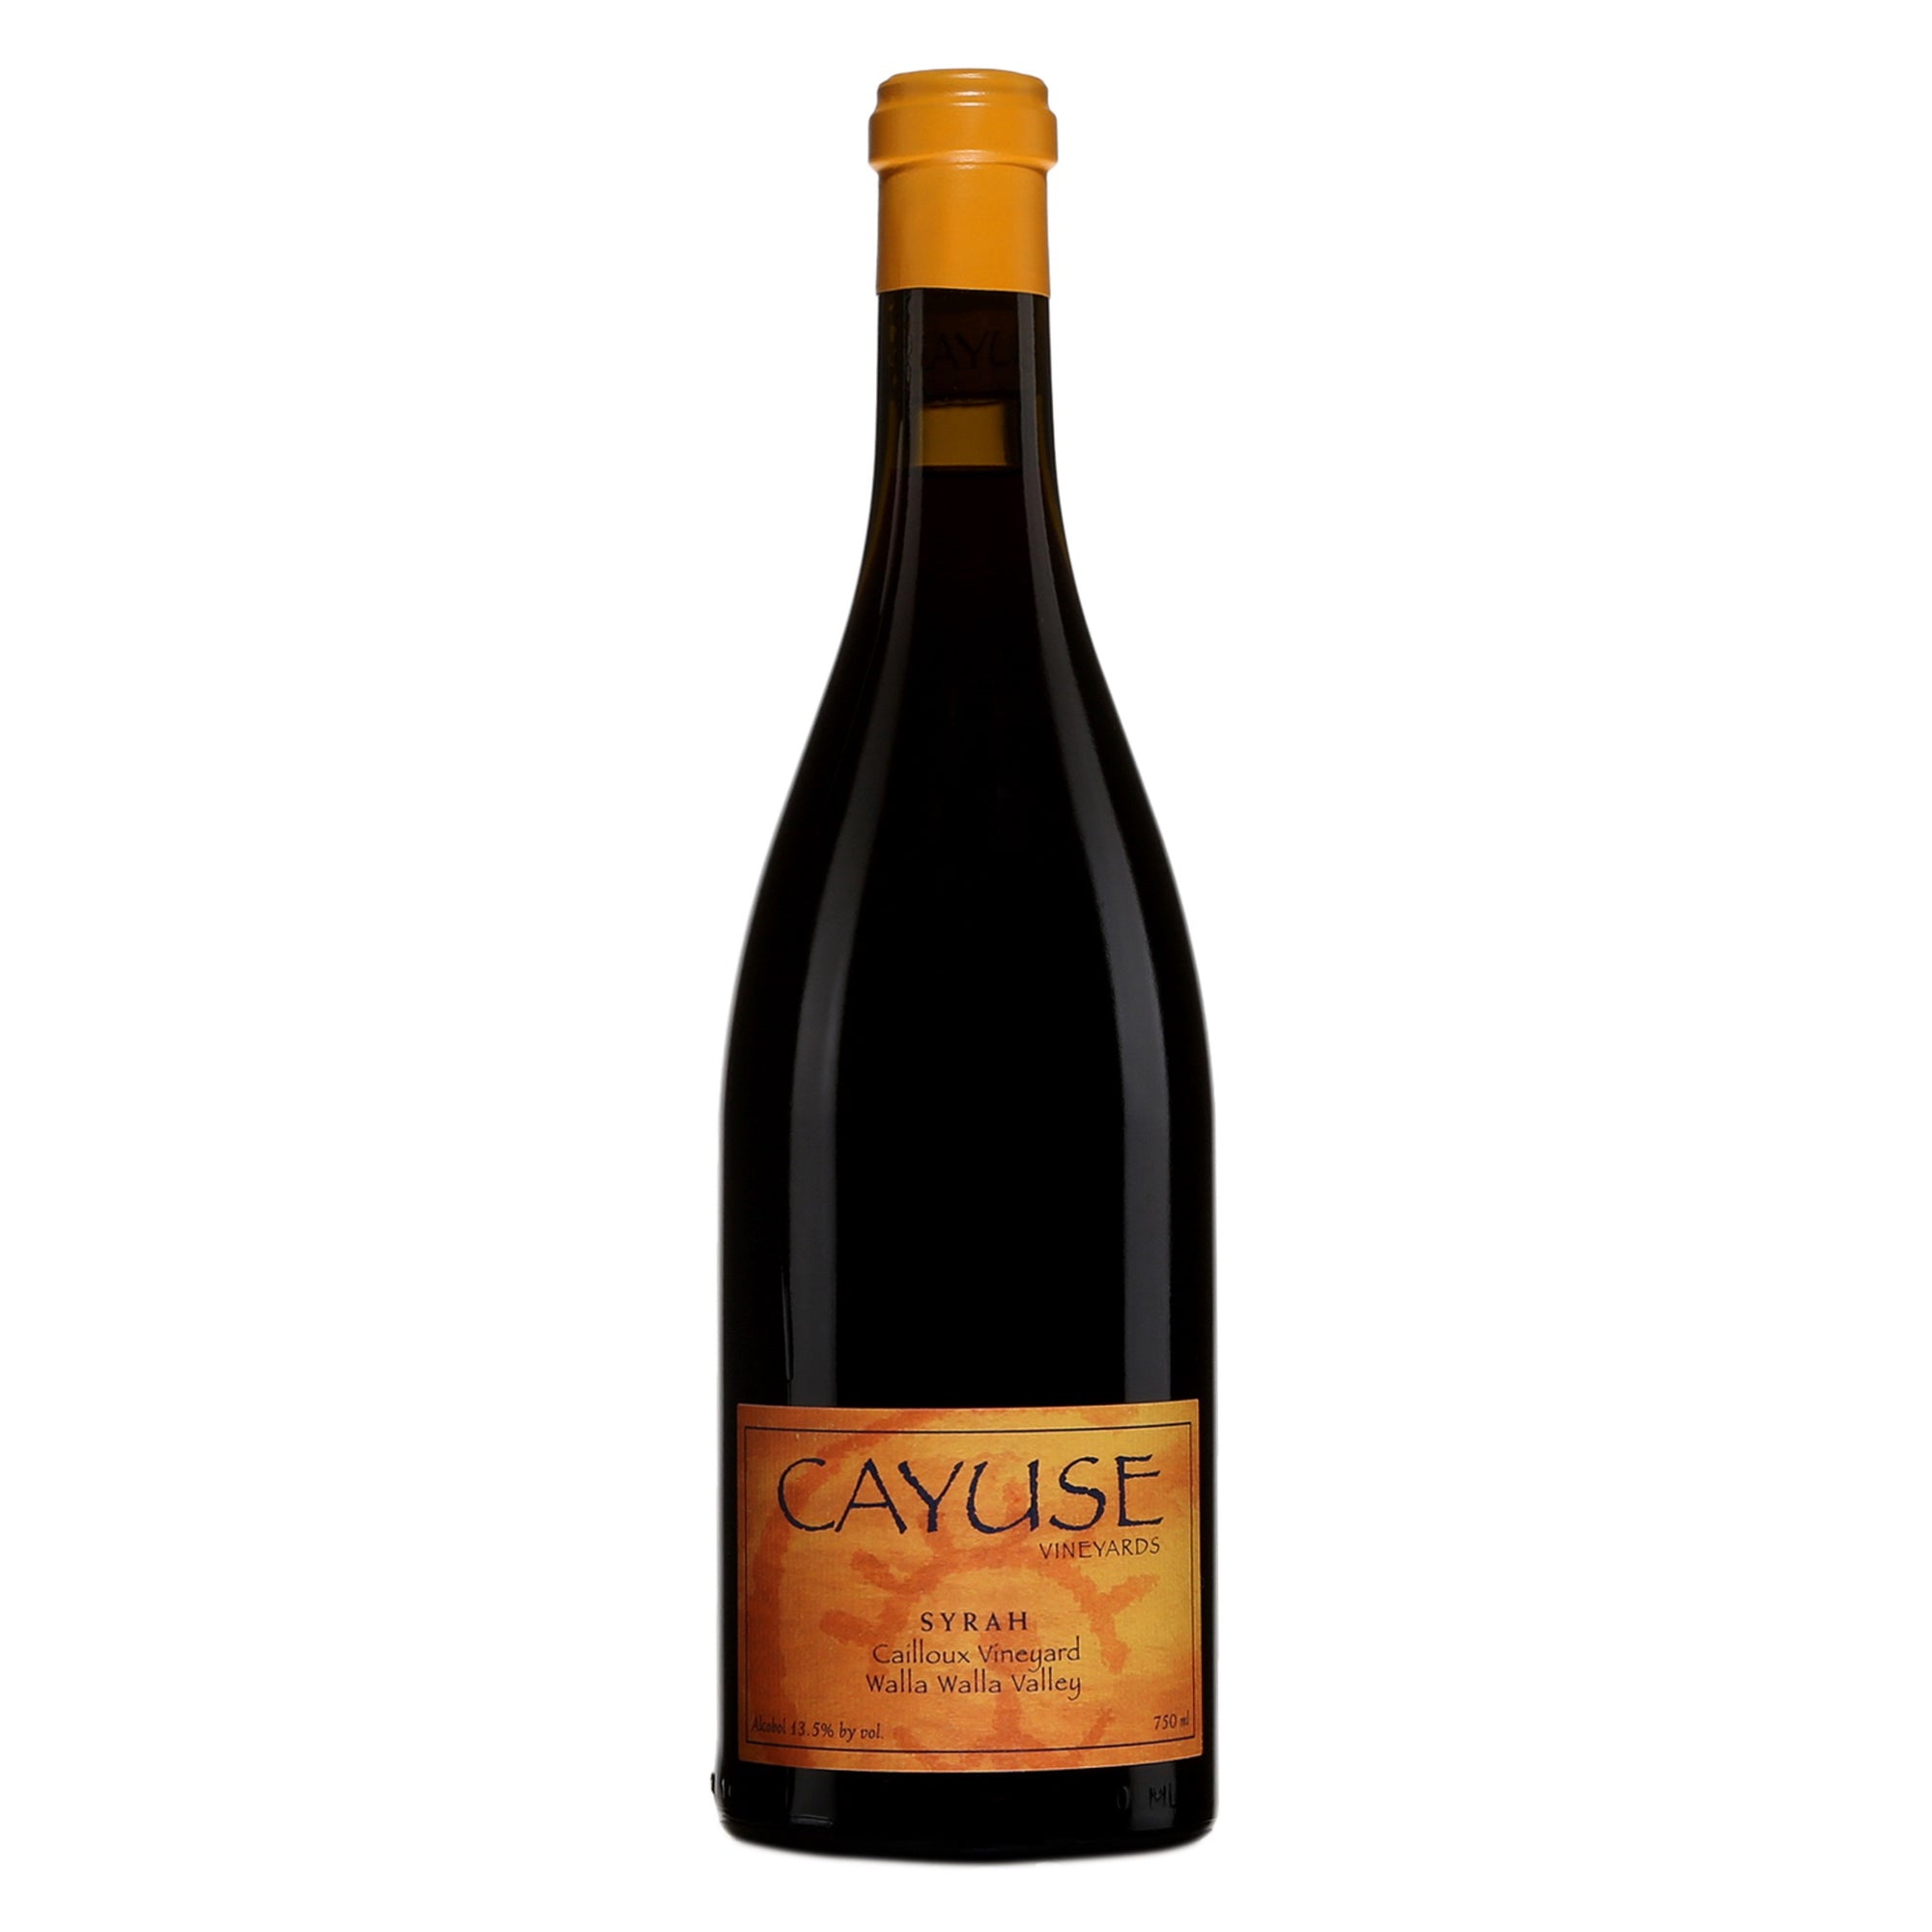 CAYUSE "Cailloux" 2019